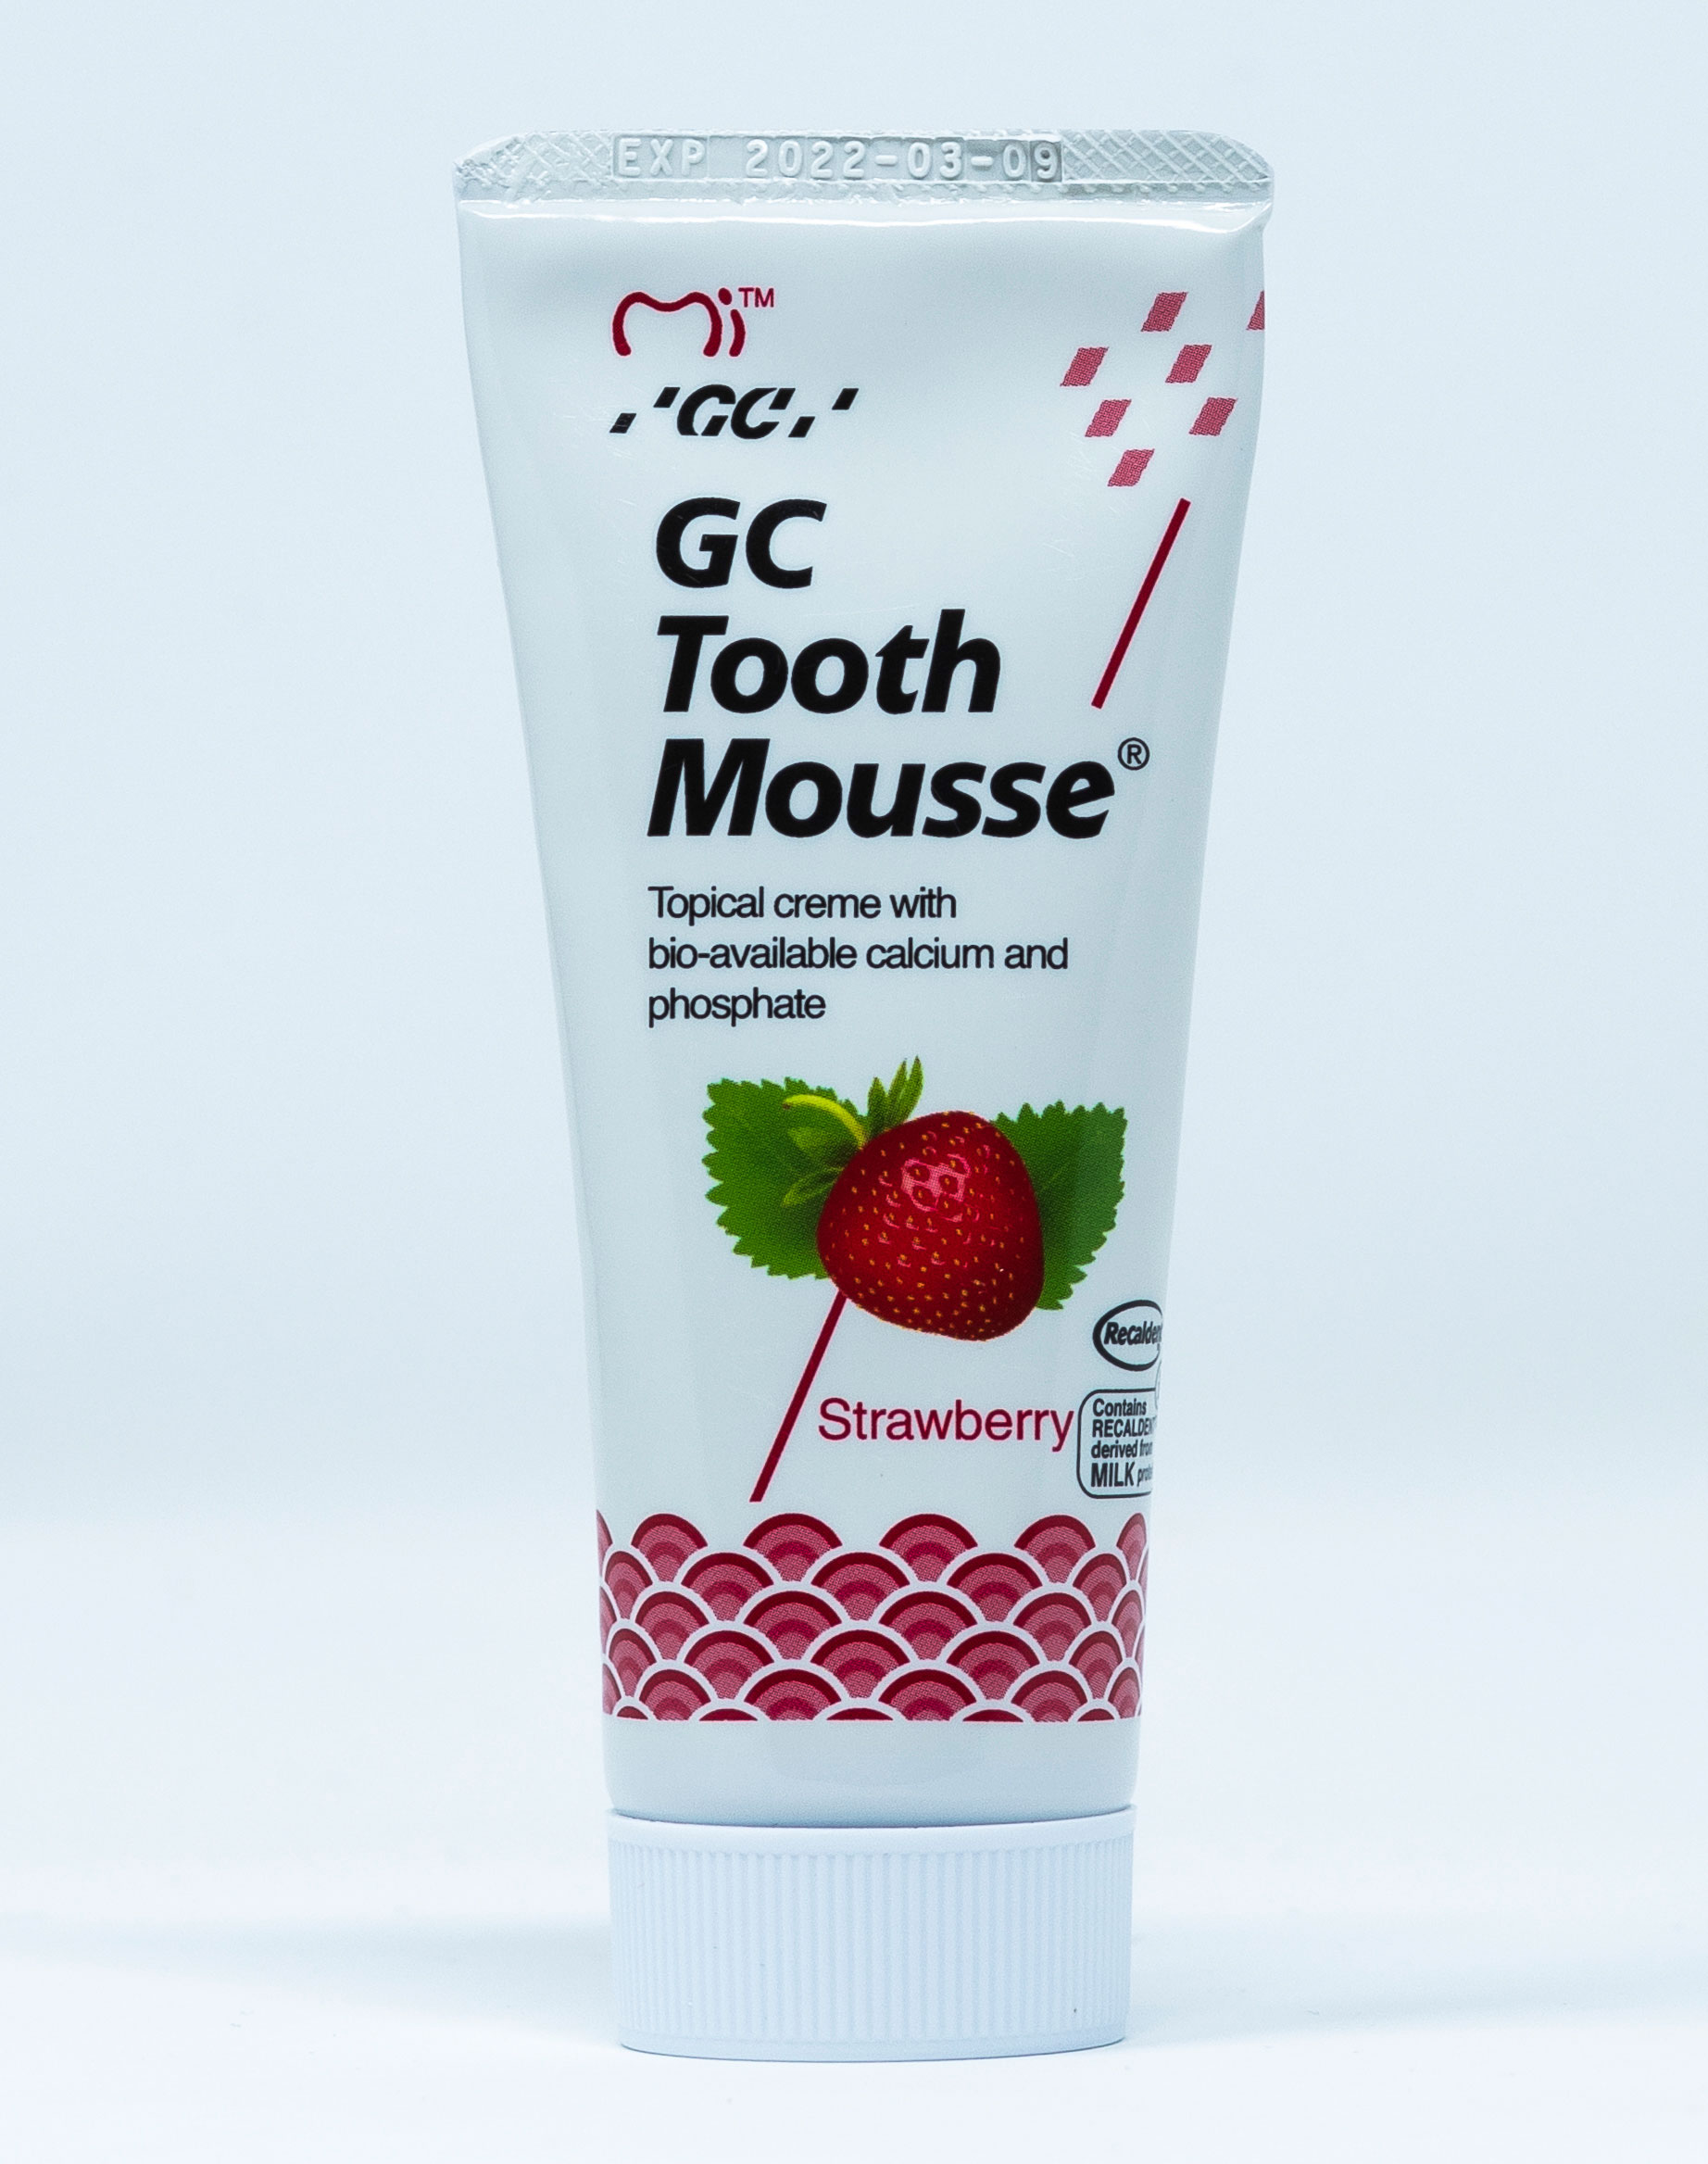 GC Crema Remineralizzante Tooth Mousse Fragola - 40 g